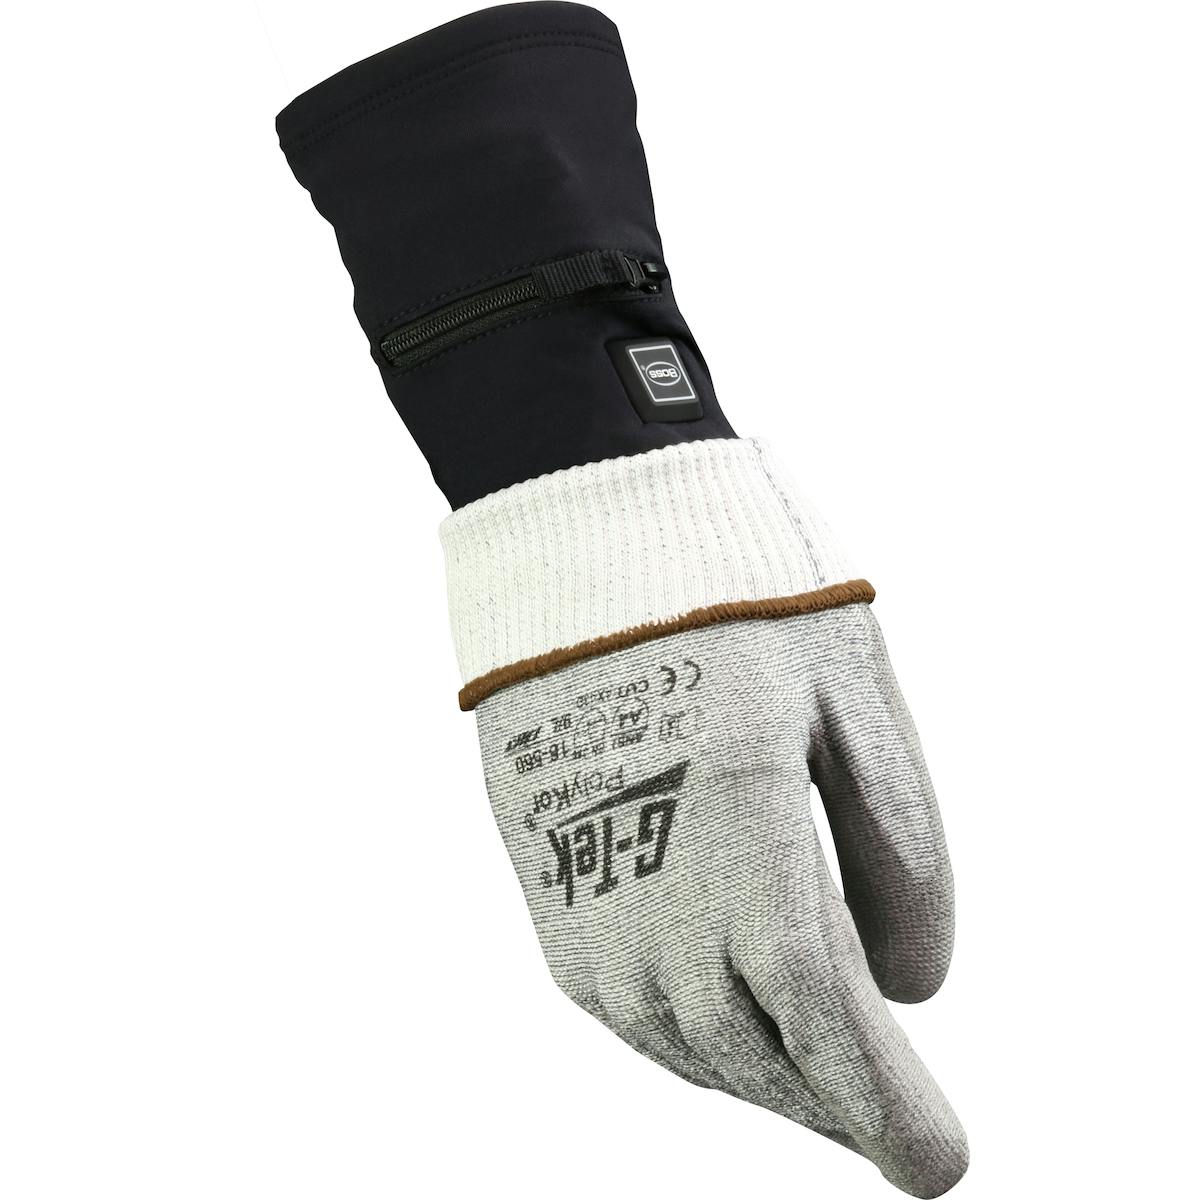 Therm™ Heated Glove Liner, Black (399-HG20) - OS_1